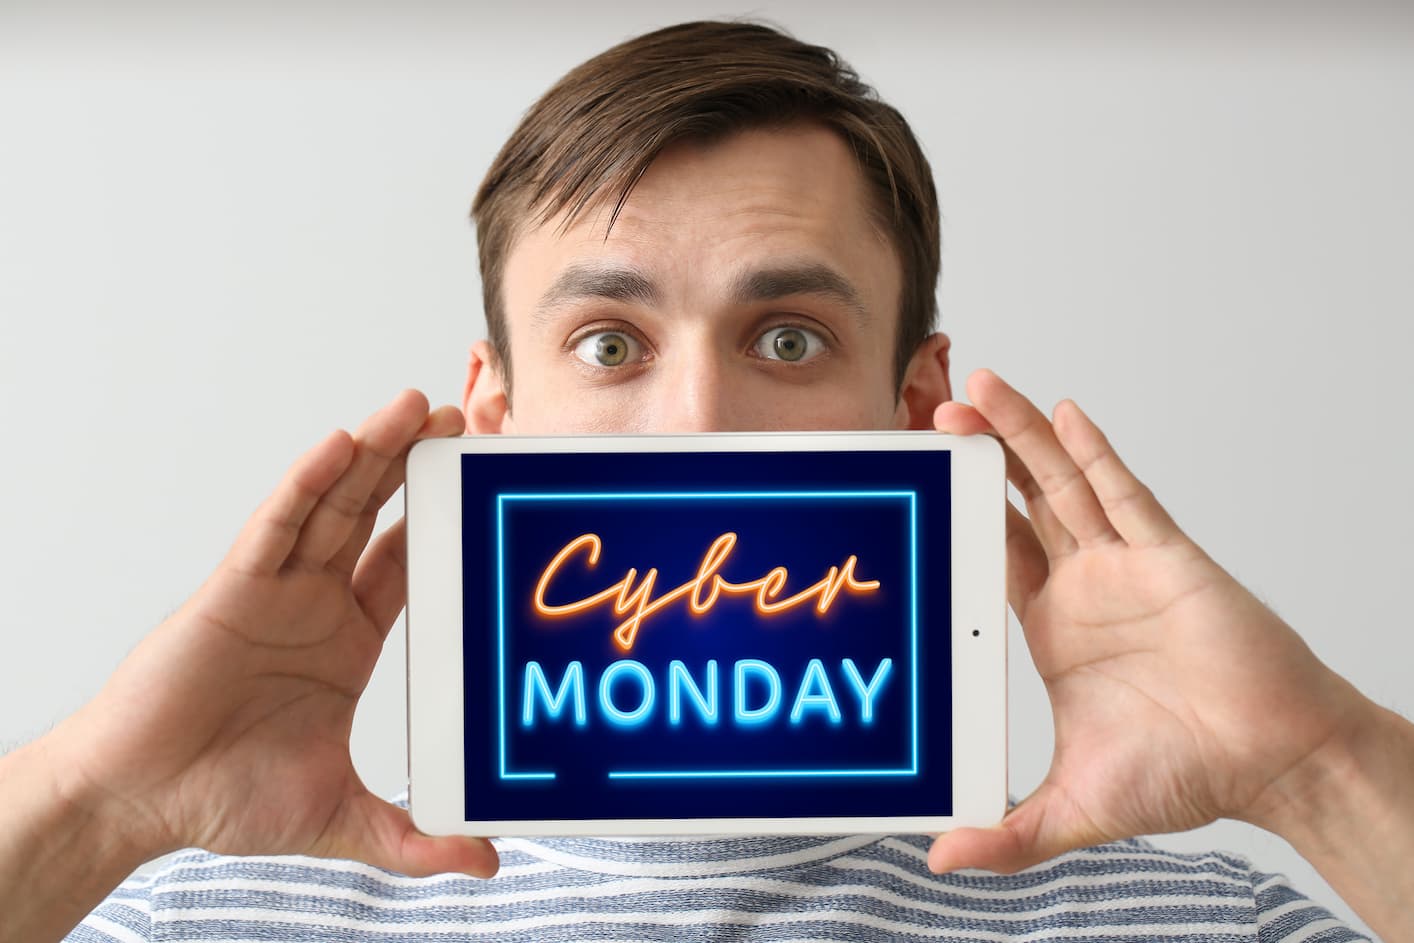 When is Cyber Monday?